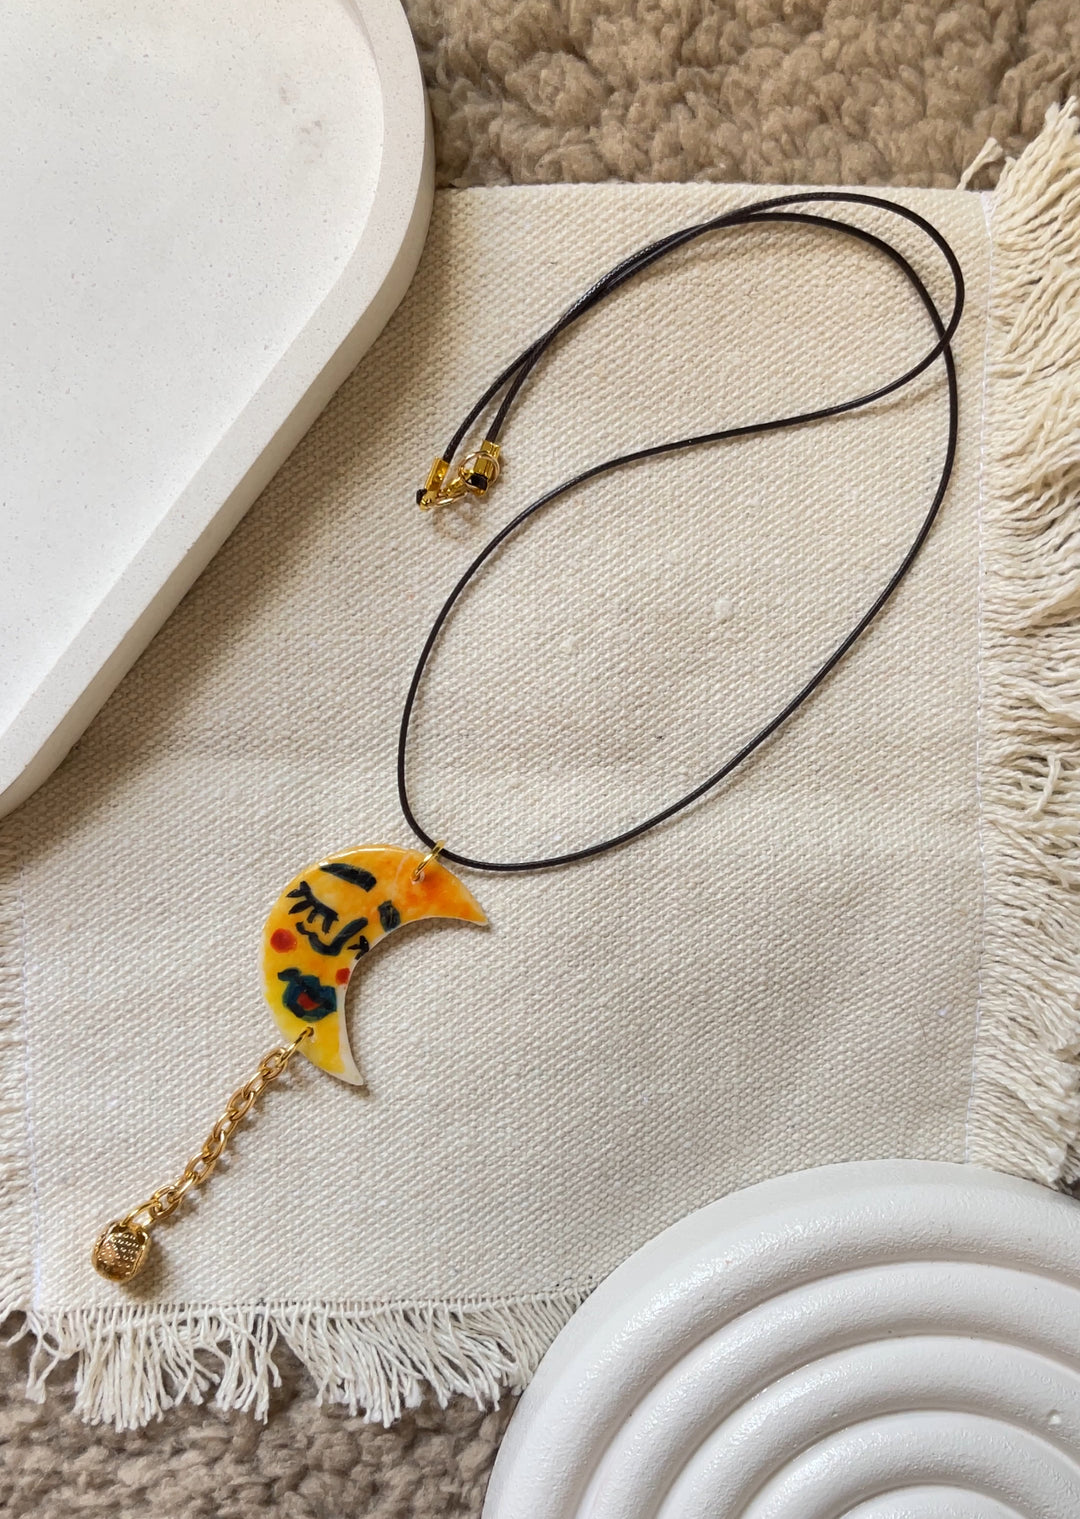 The moon face in yellow necklace